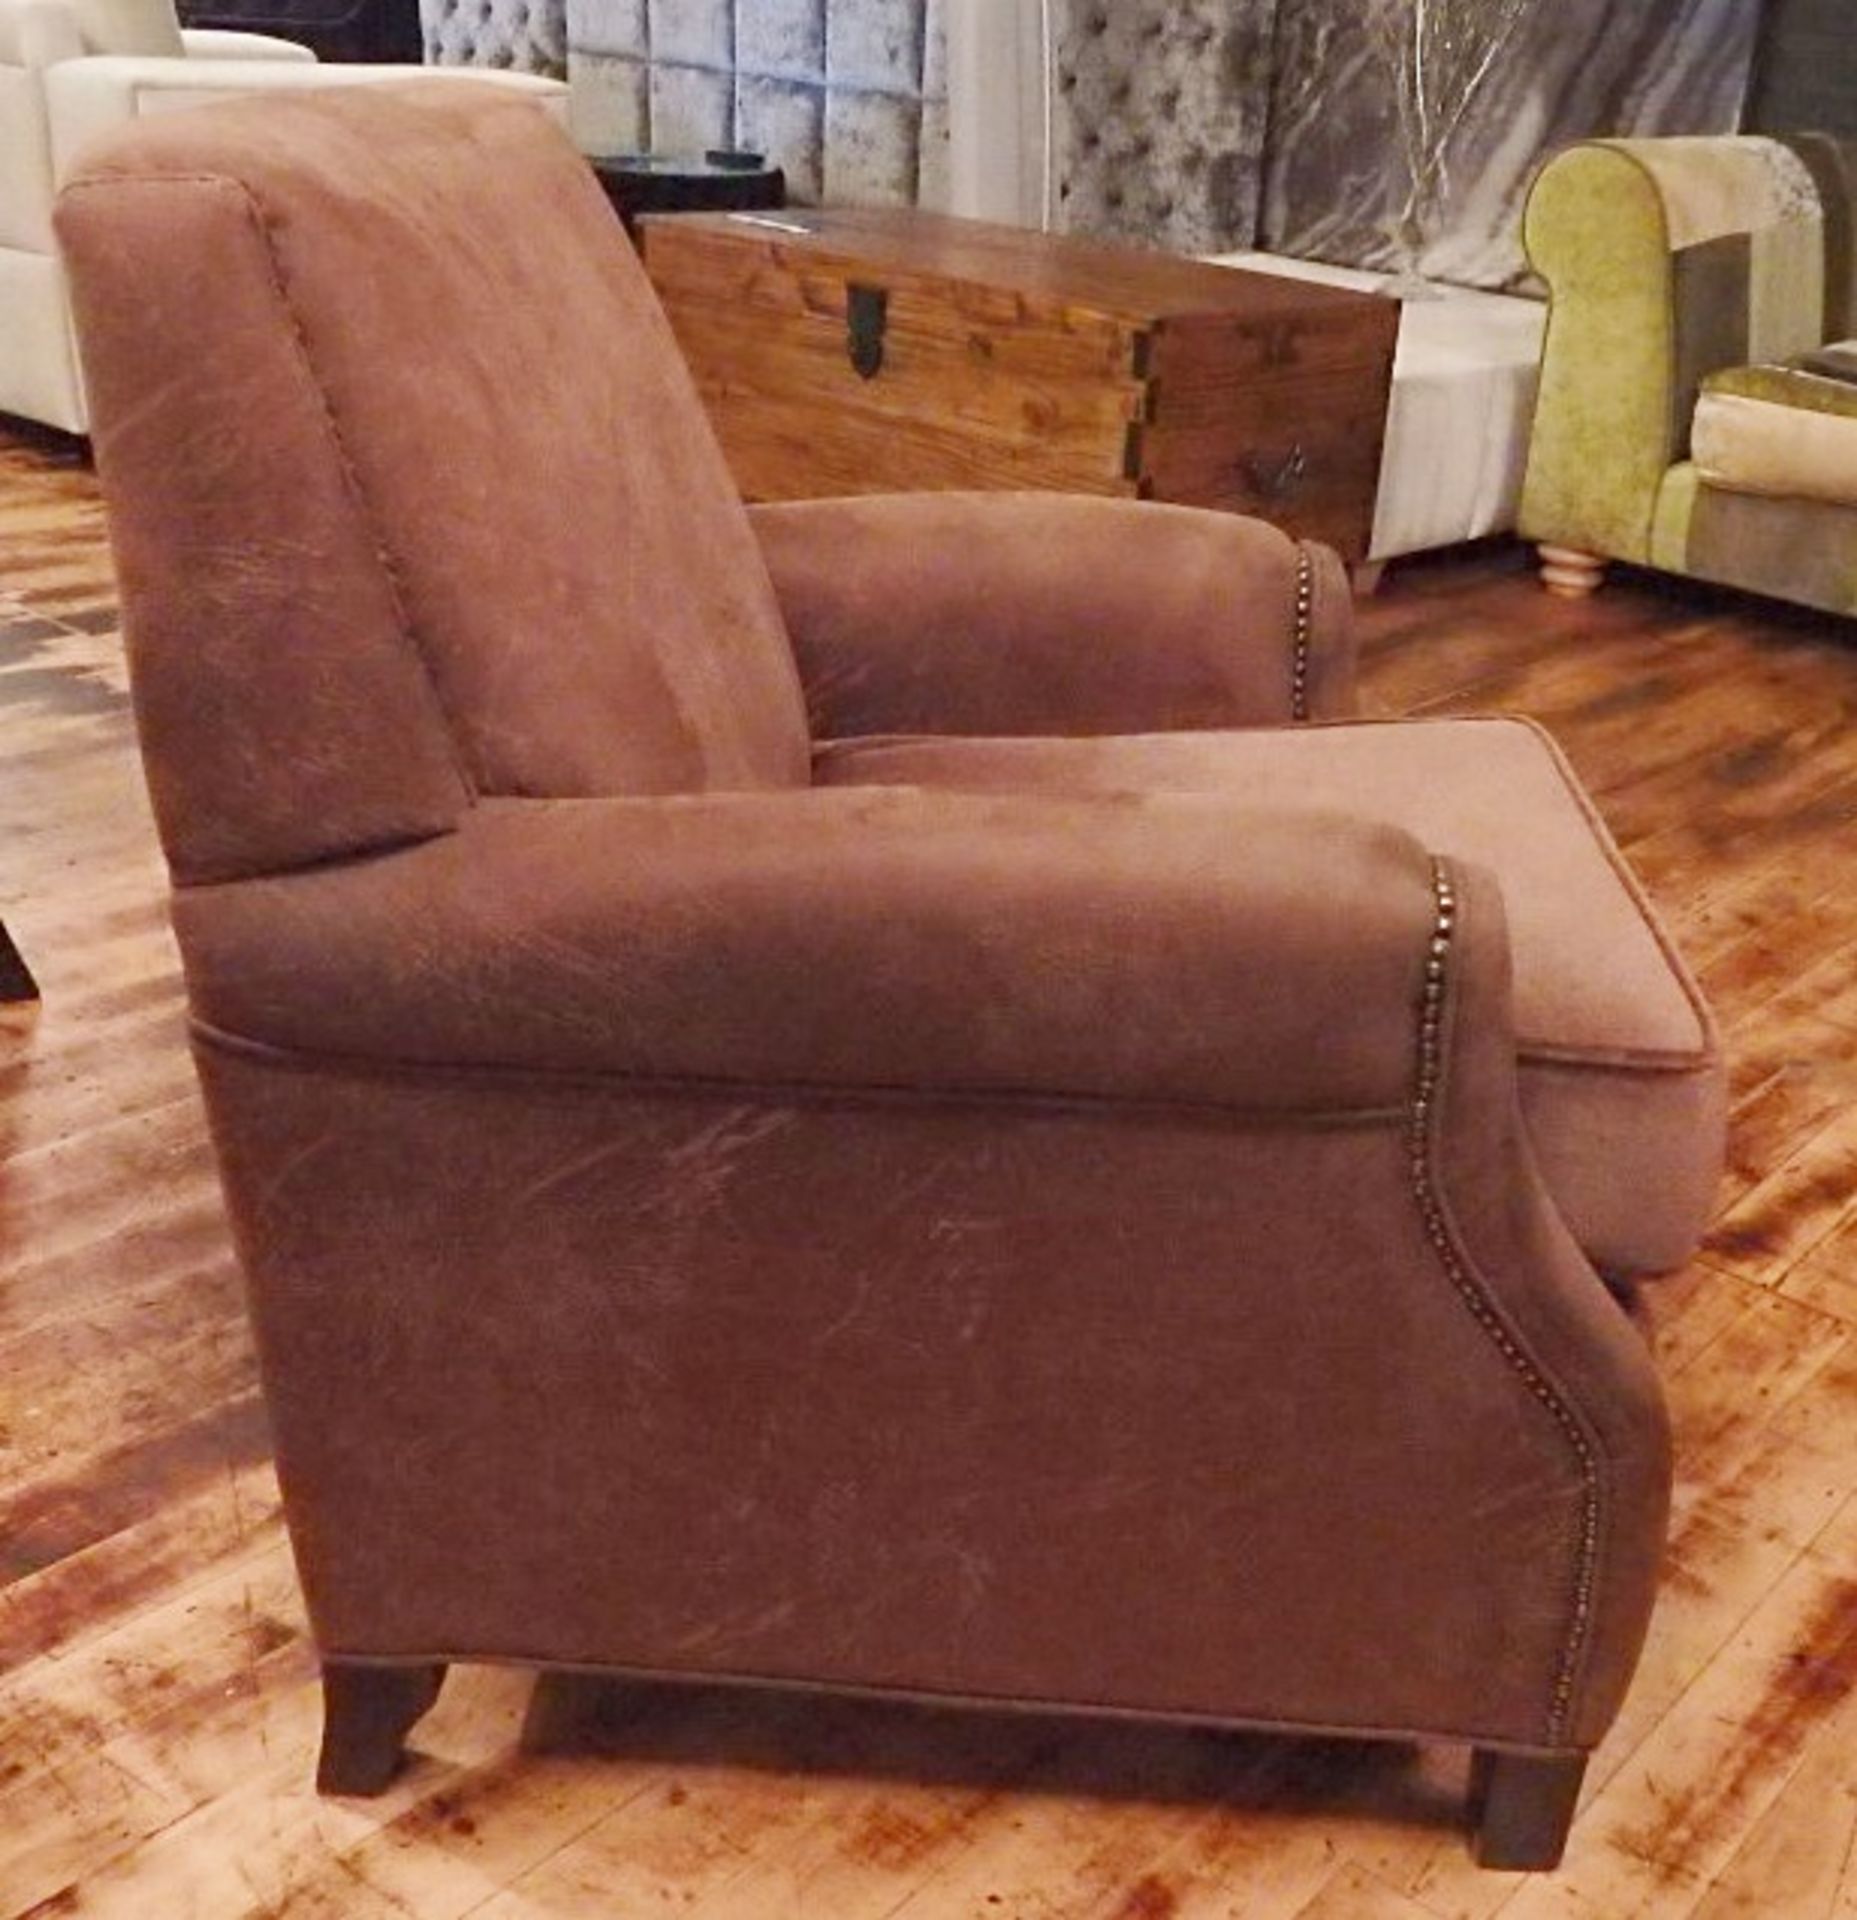 1 x Bespoke Brown Leather & Chenille Armchair - Expertly Built And Upholstered By British - Image 3 of 5